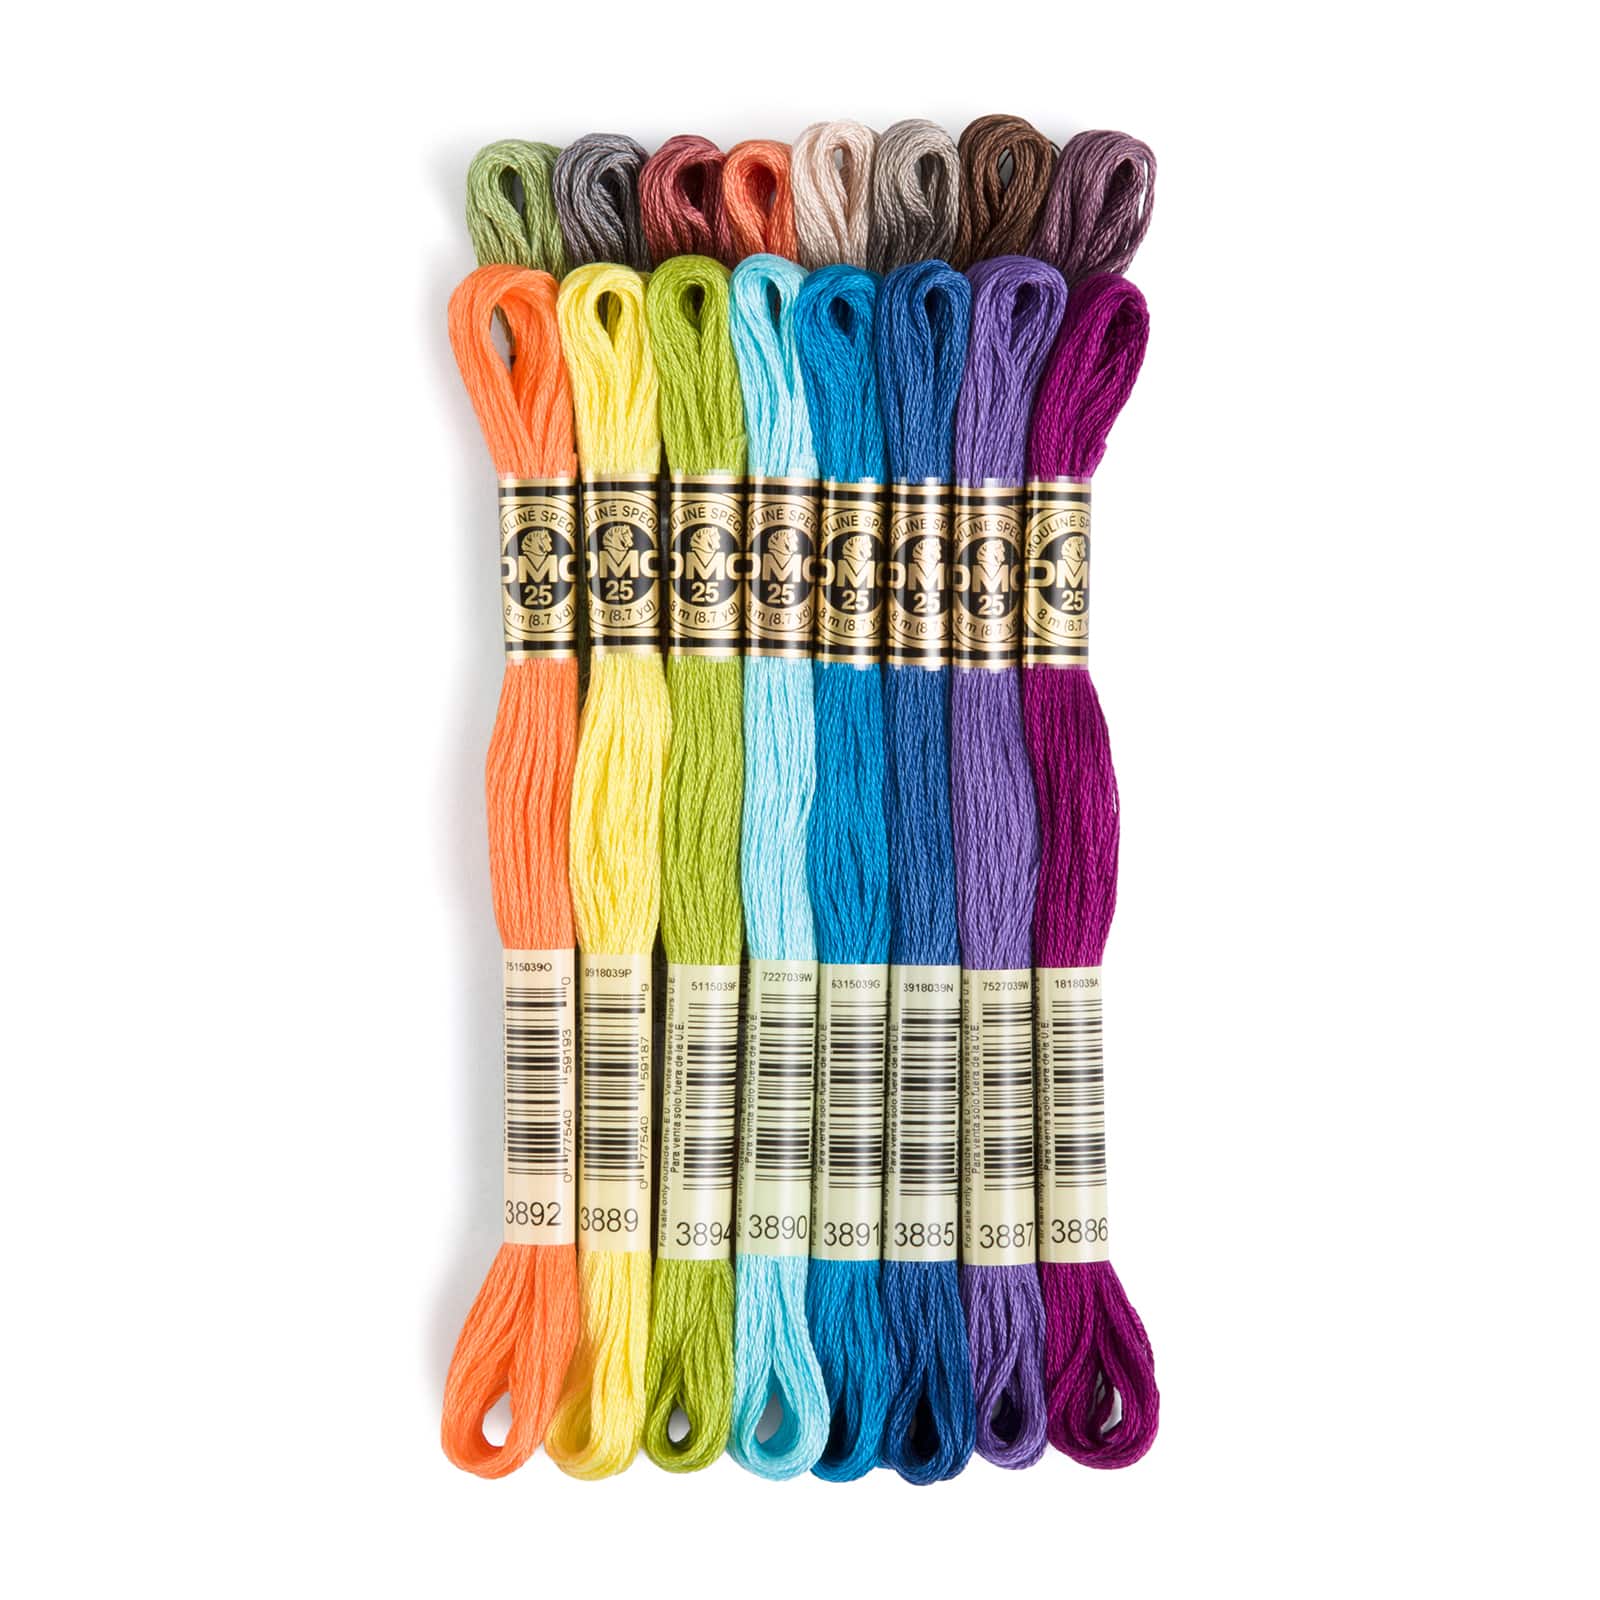 DMC® Embroidery Floss Pack at Michaels